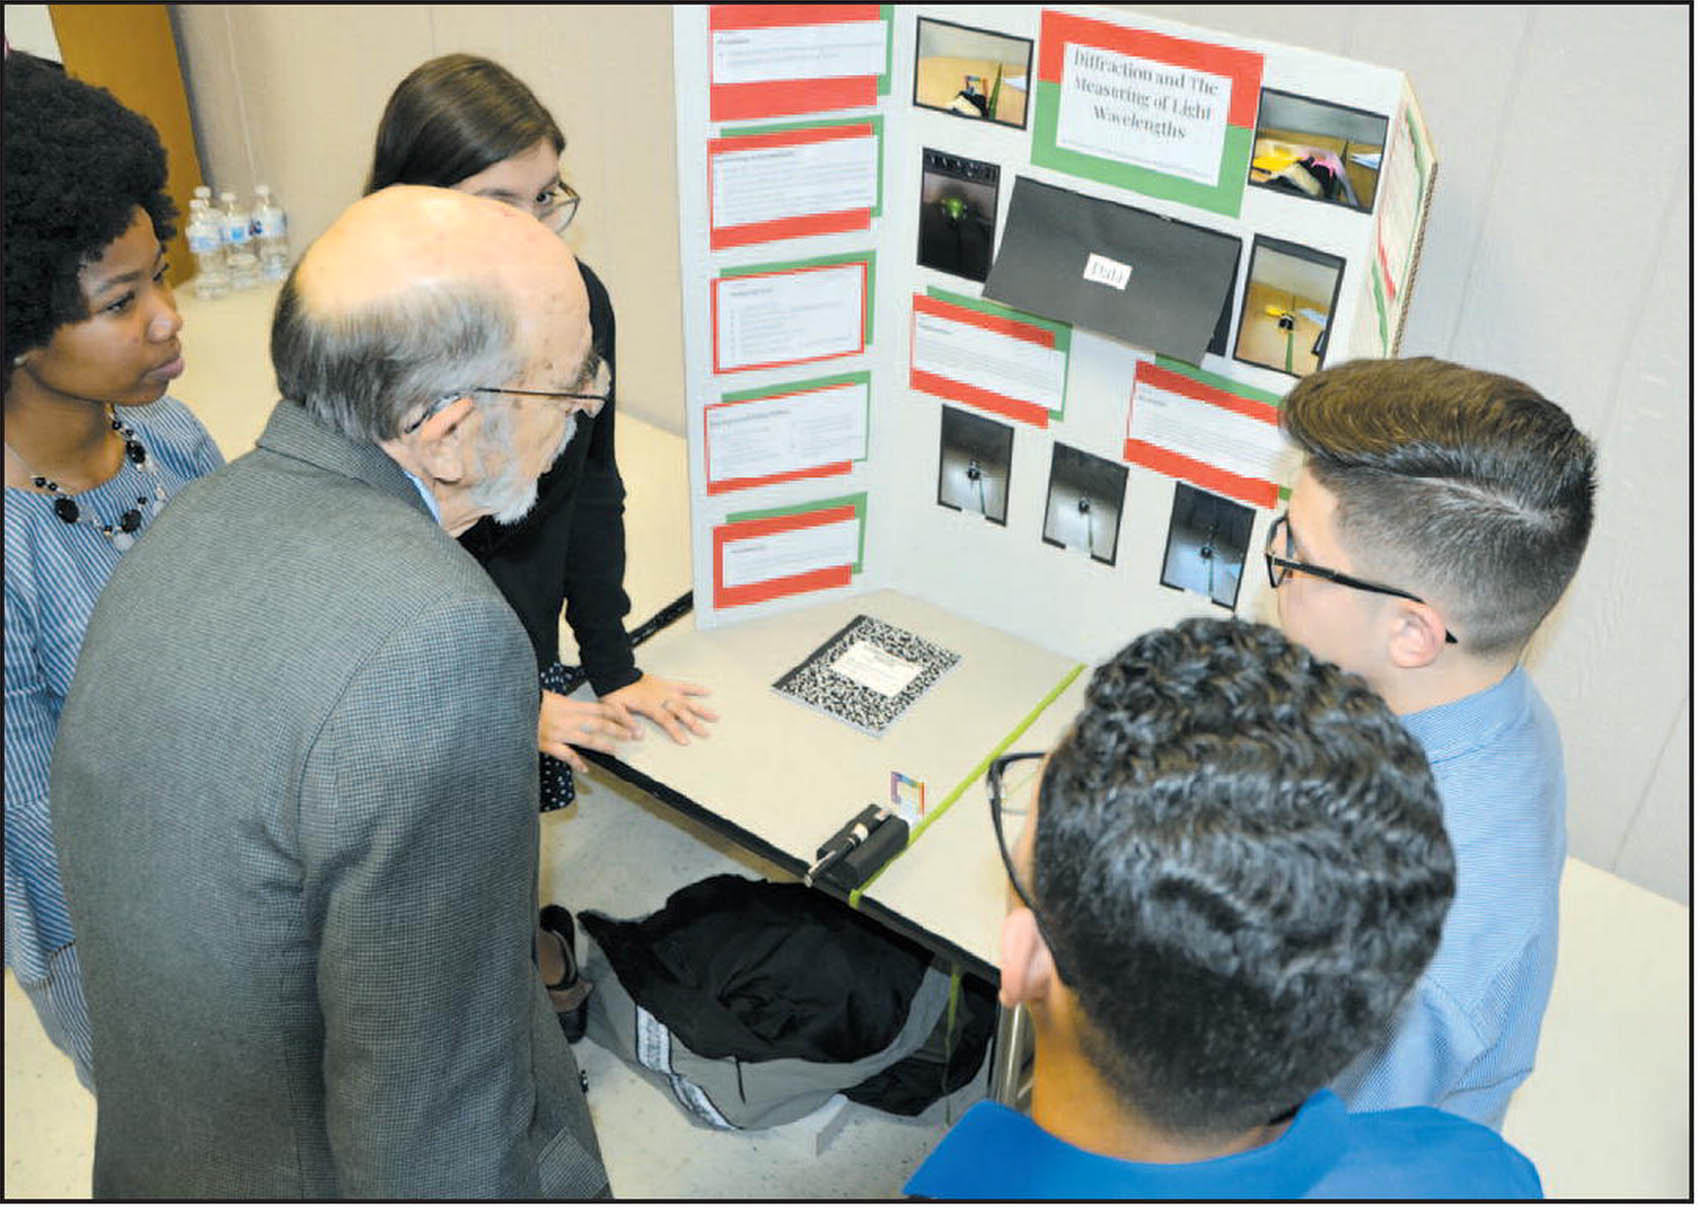 Read the full story, CCCC Laser Club hosts inaugural event